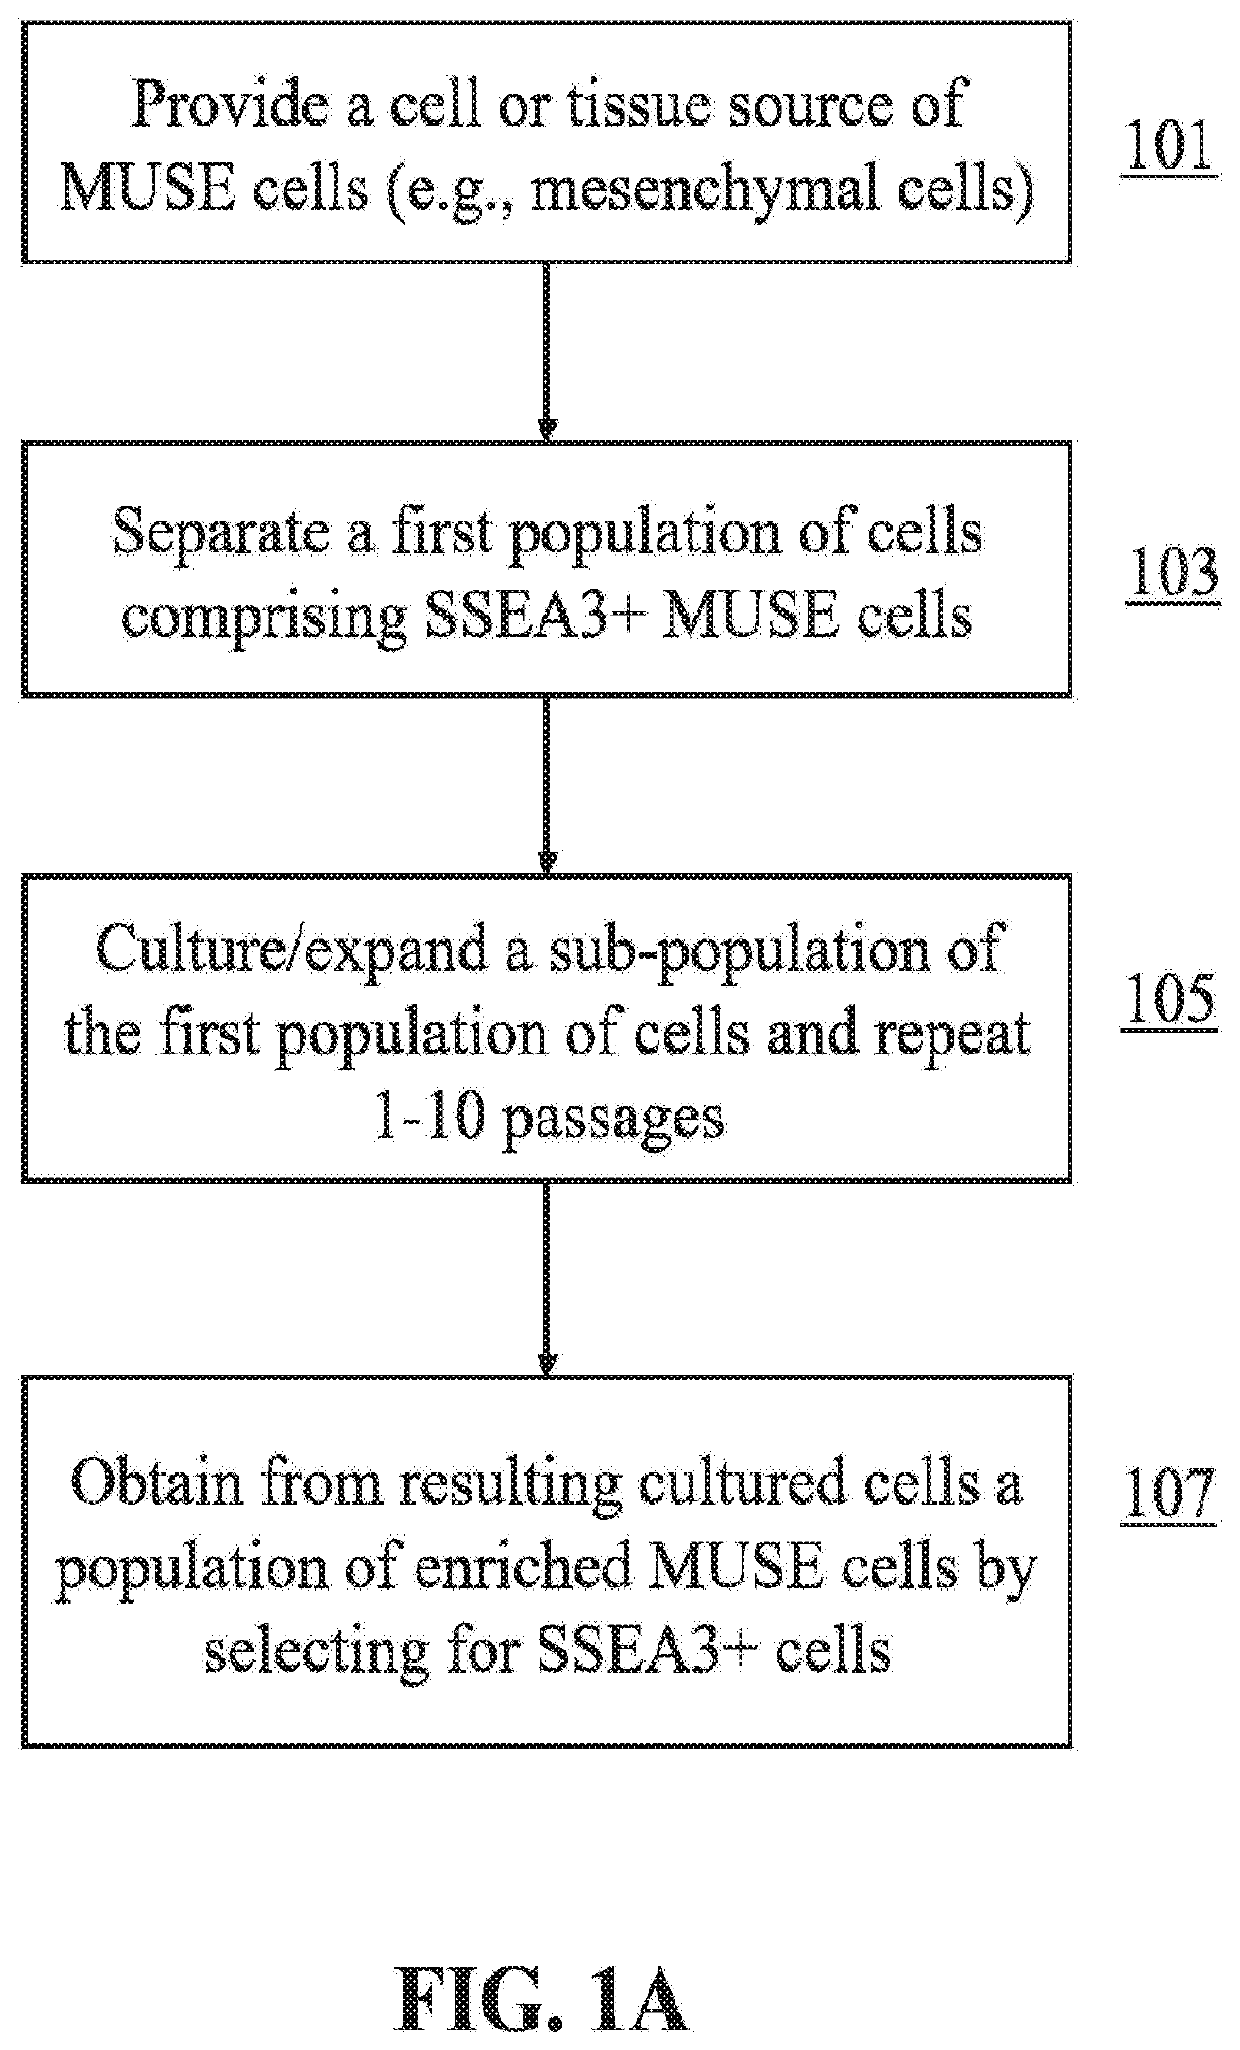 Methods for enriching populations of cells